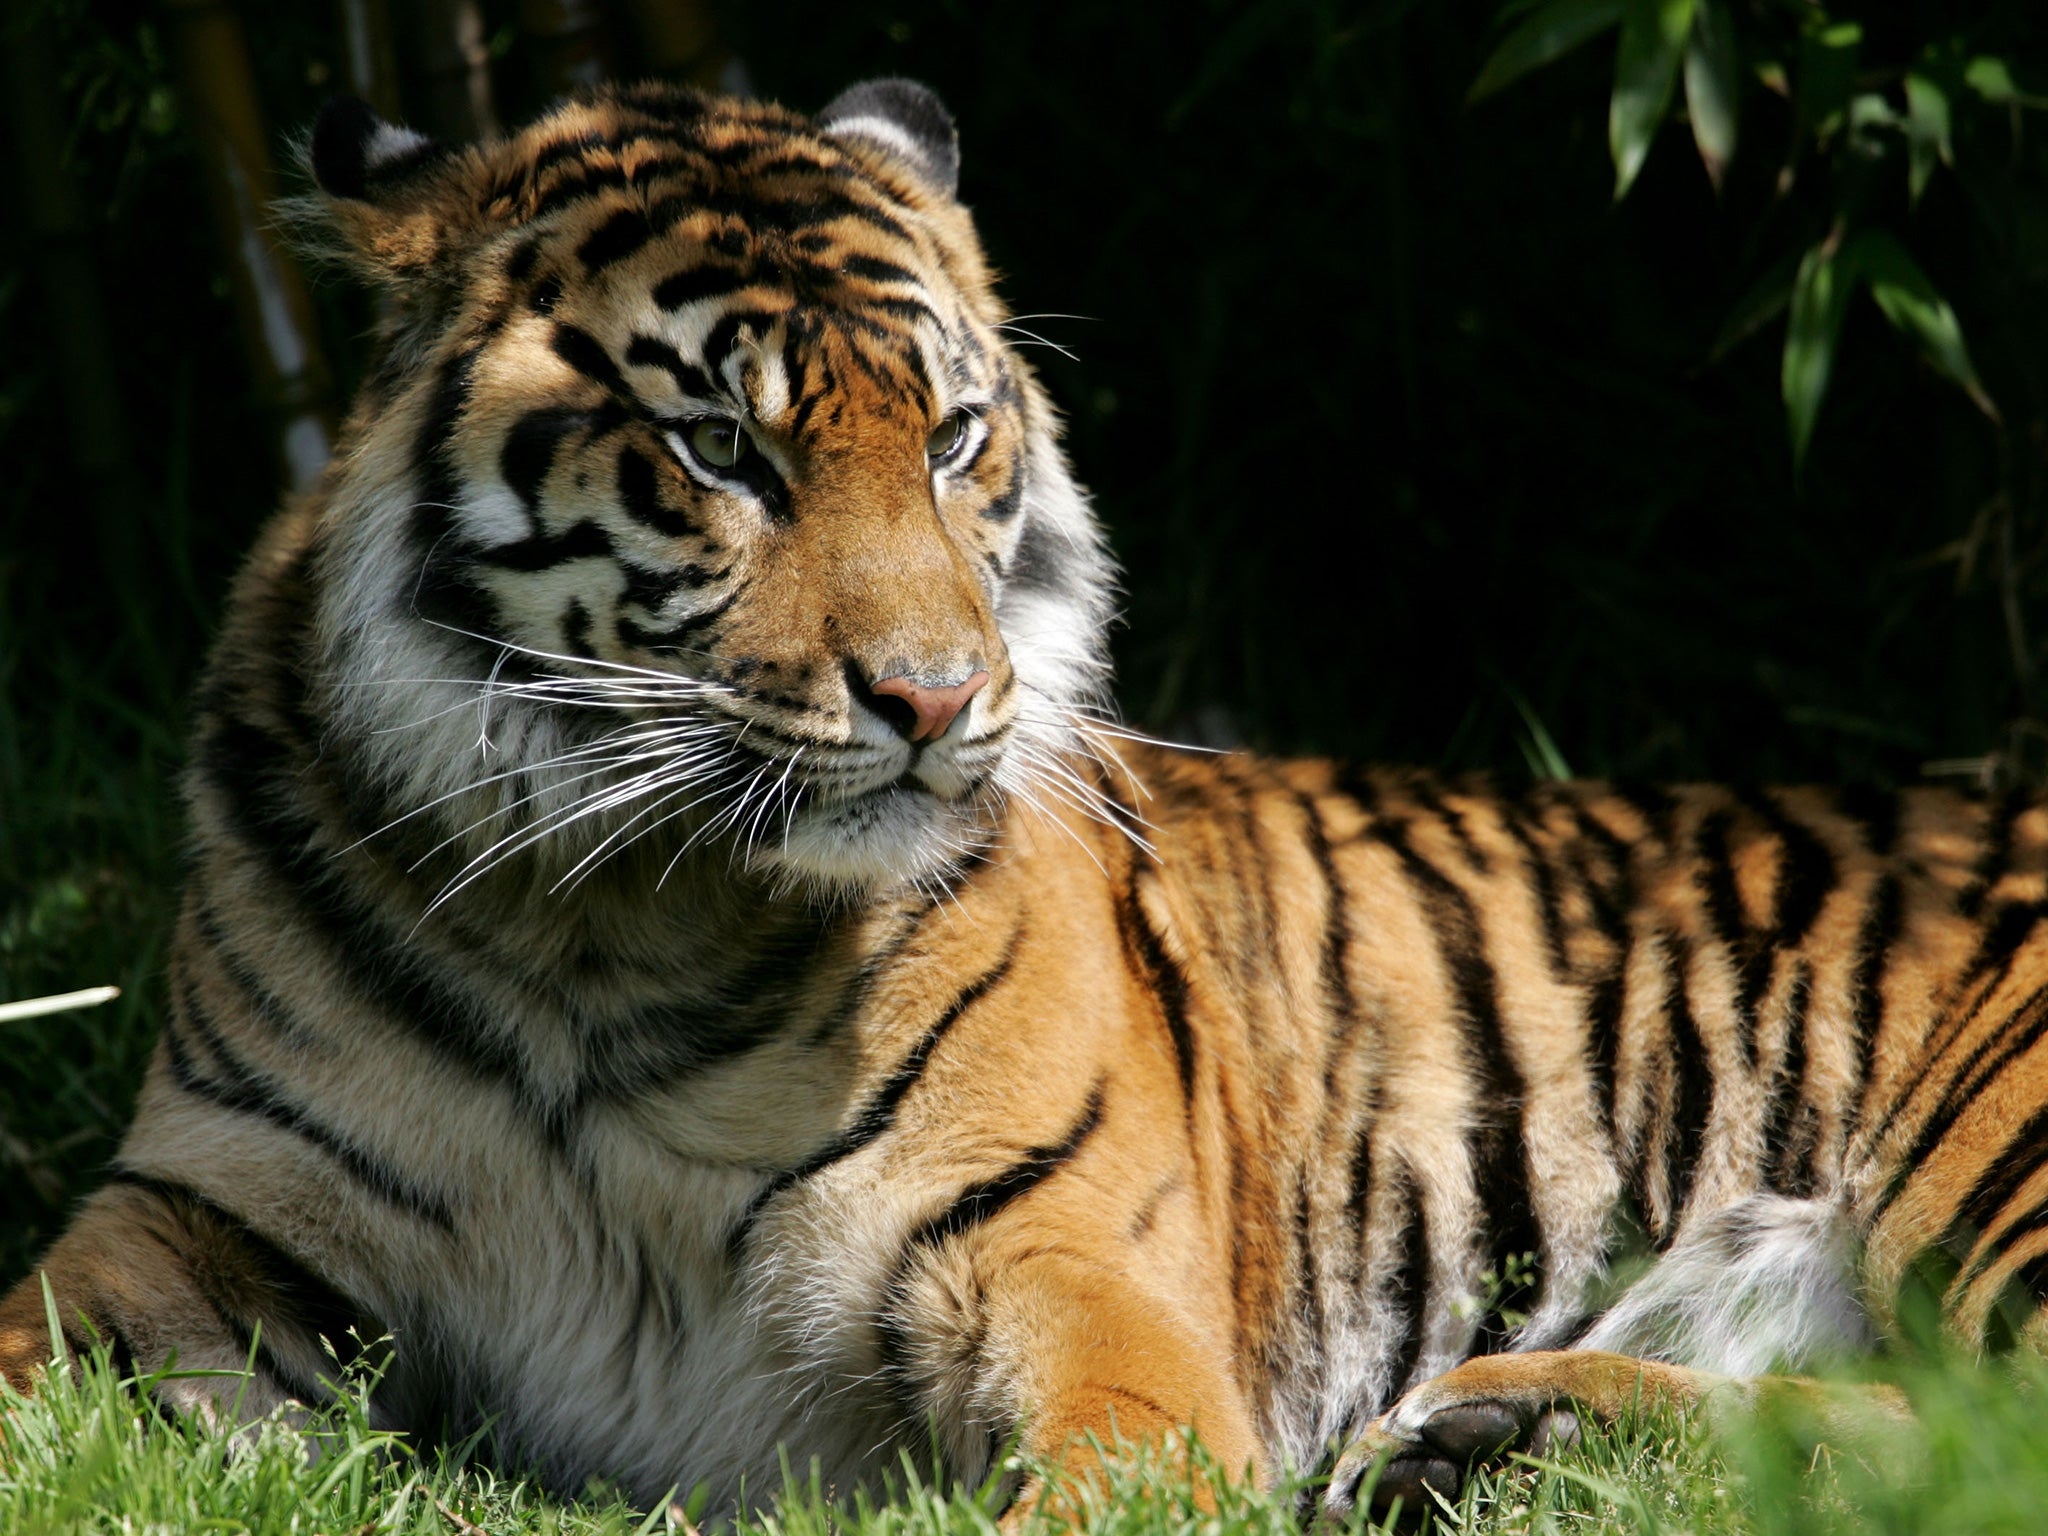 The Sumatran tiger is one of the species that would benefit from the suggested policy